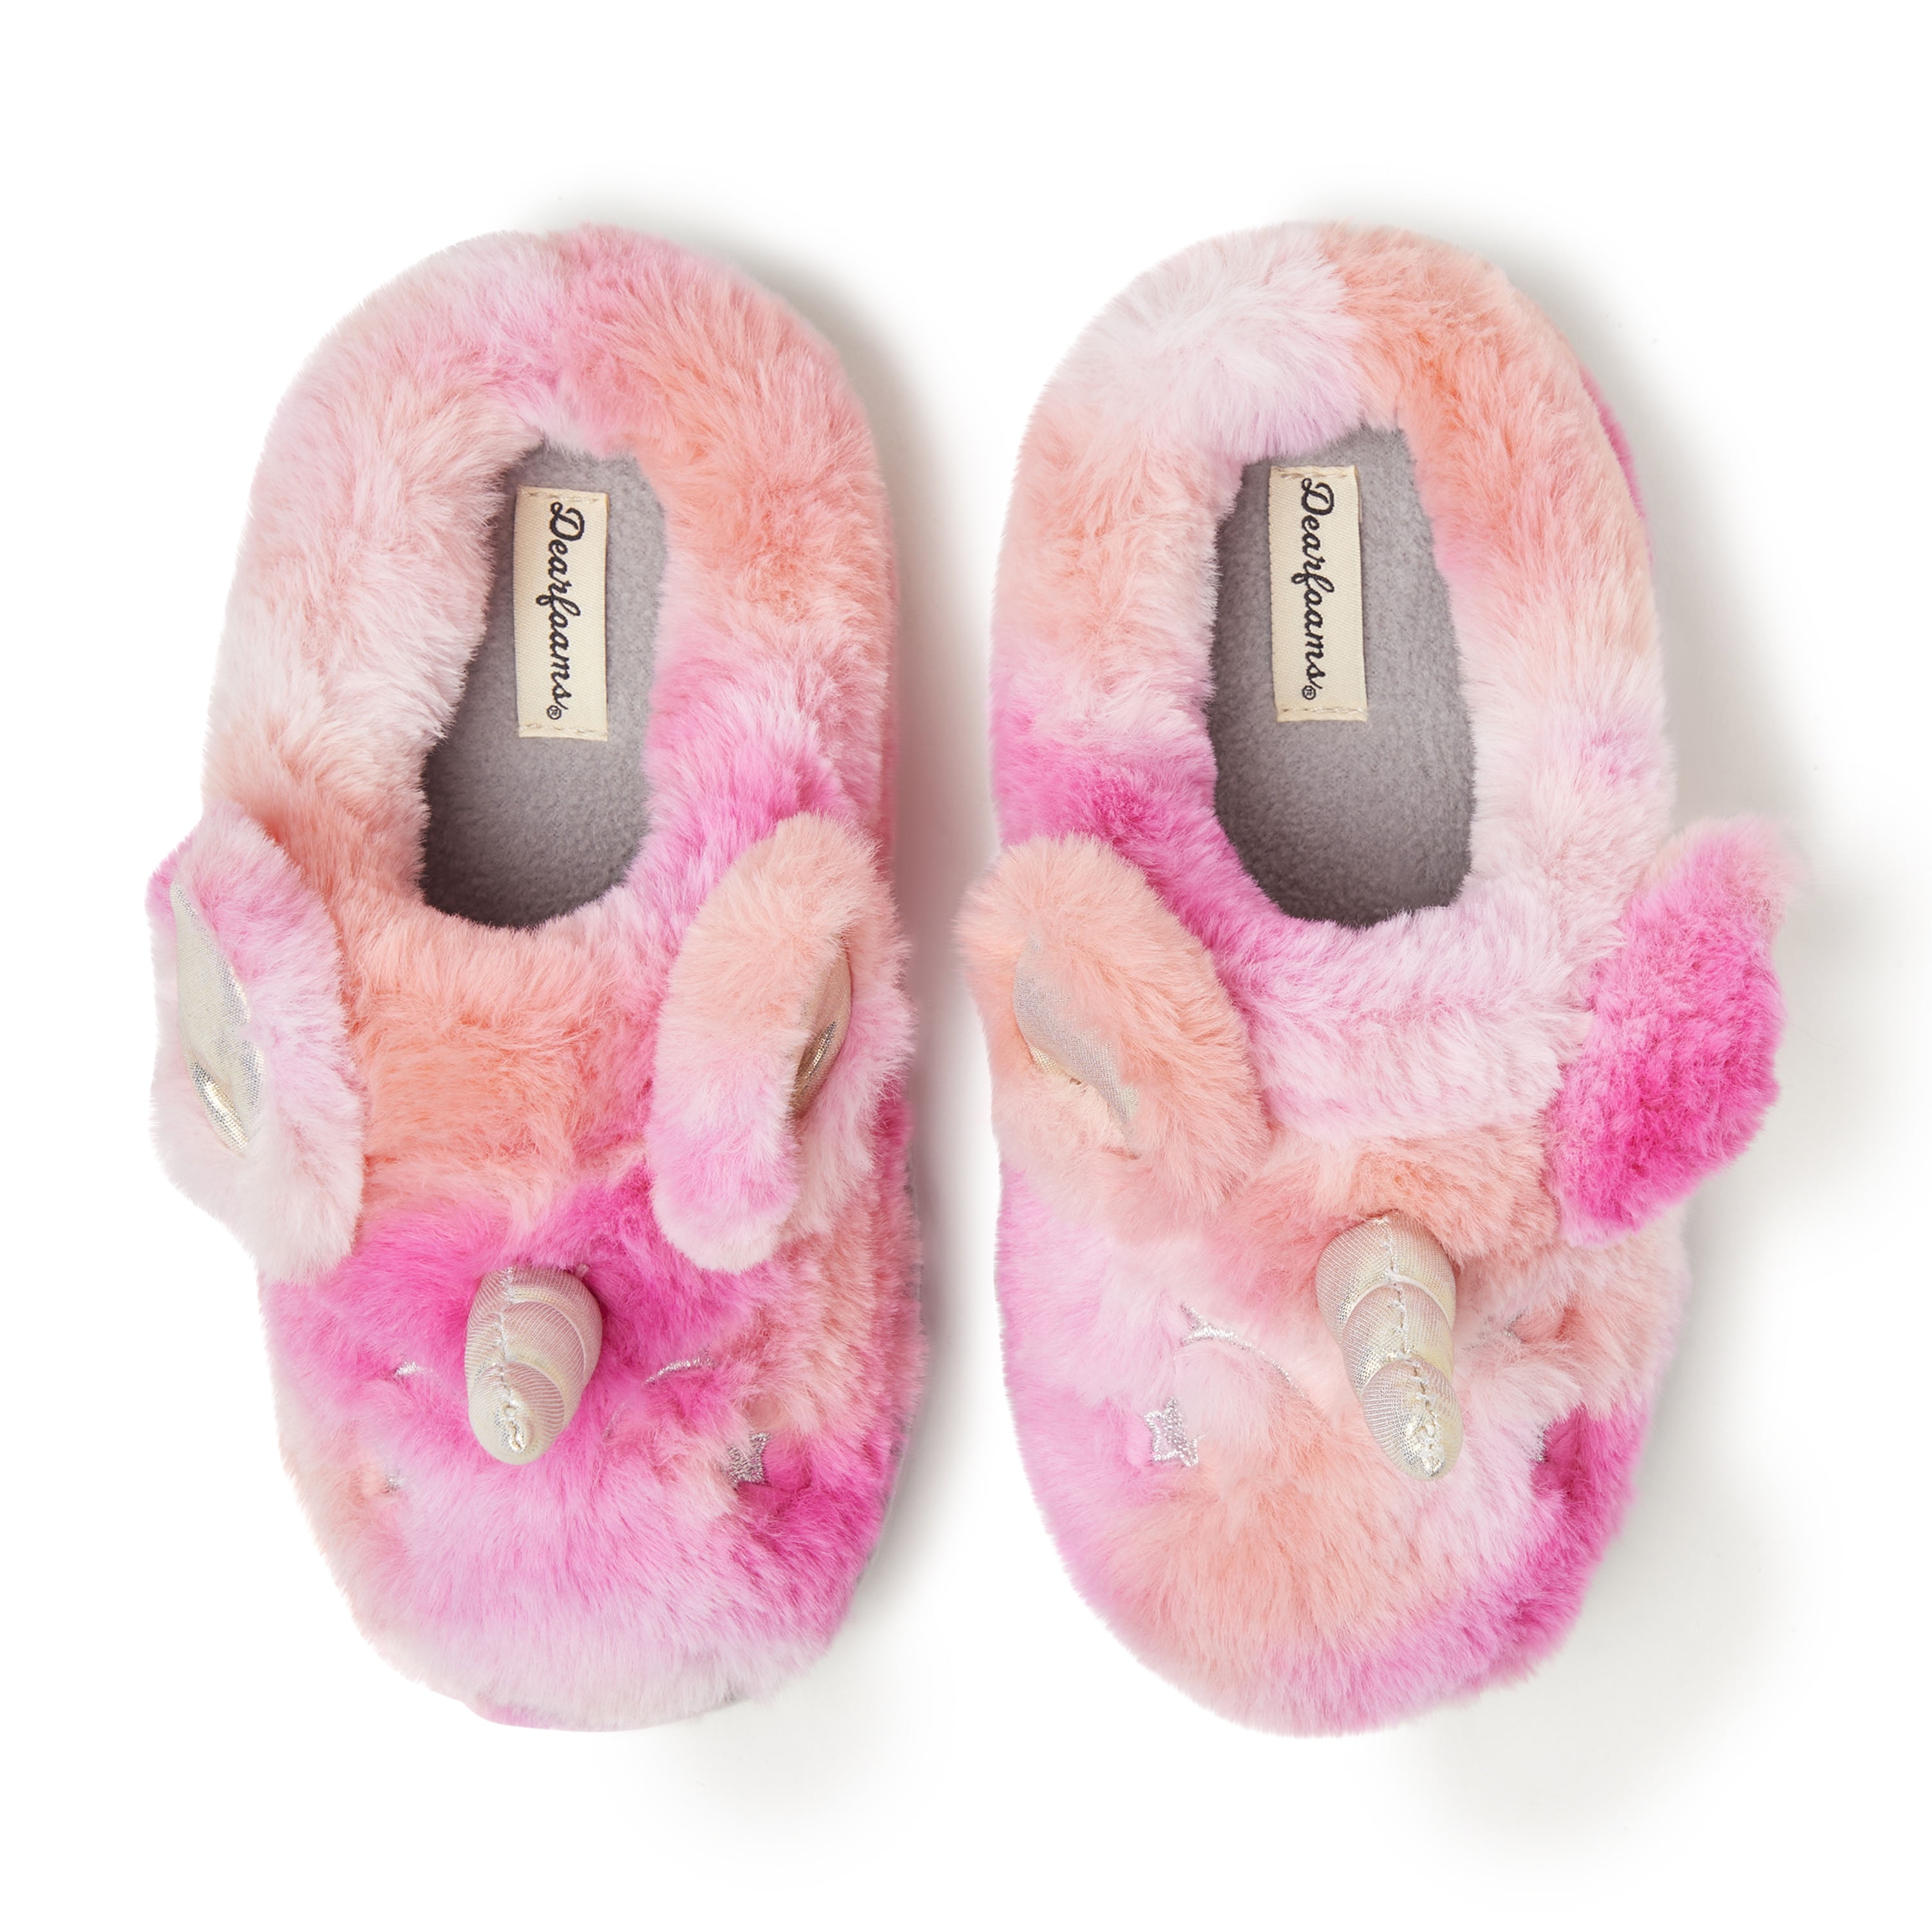 Bear Design Fuzzy Novelty Slippers, Pink Preppy Style College Cartoon Fun  Slippers